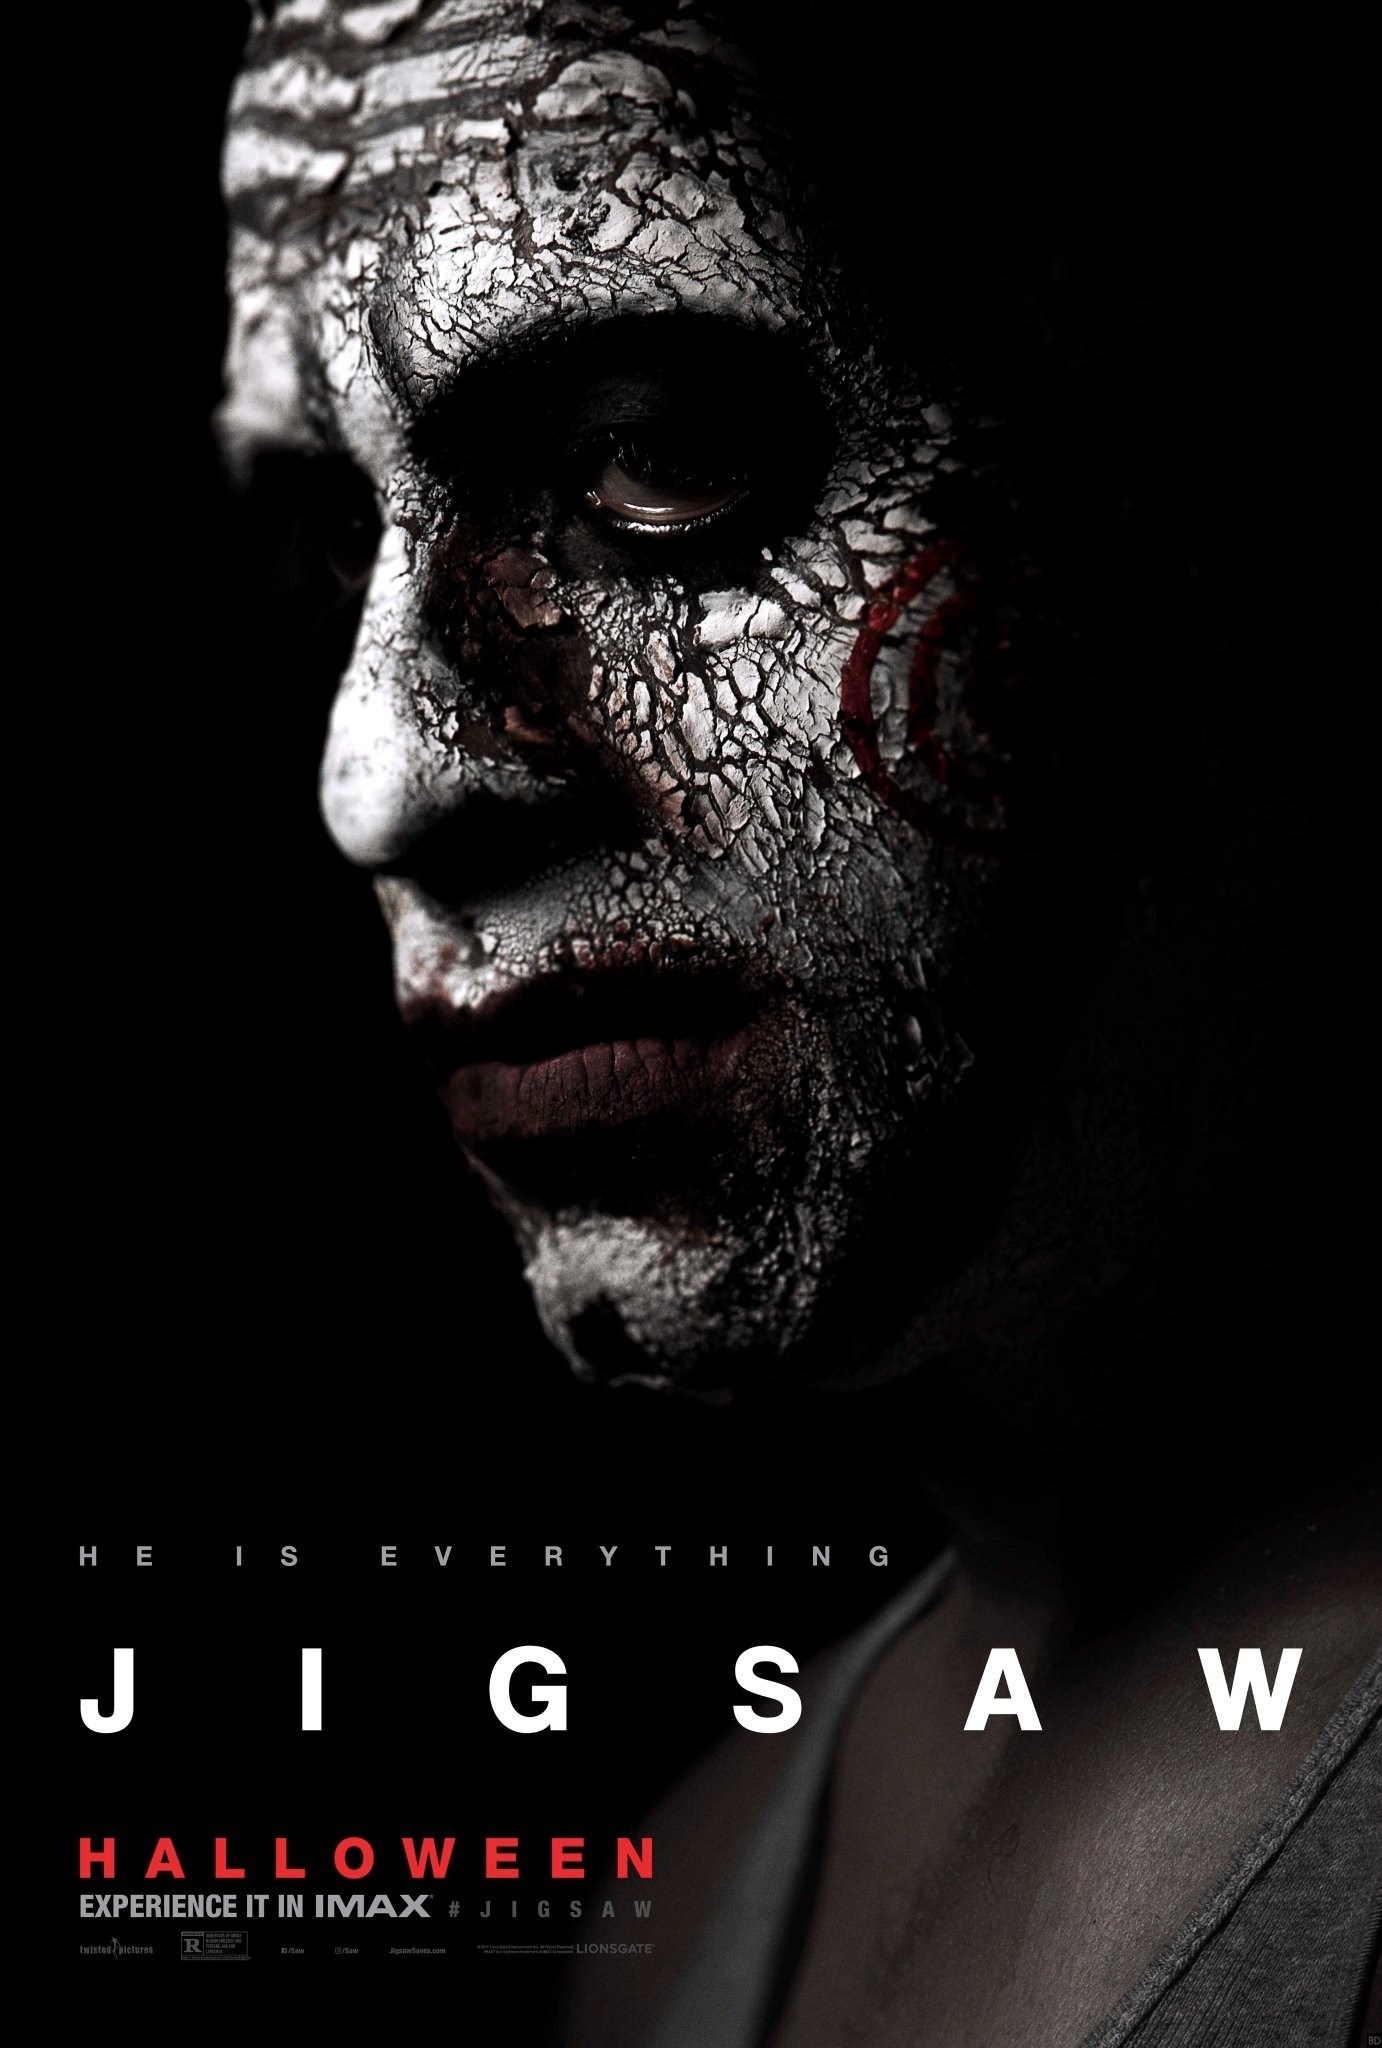 Jigsaw He is Everything